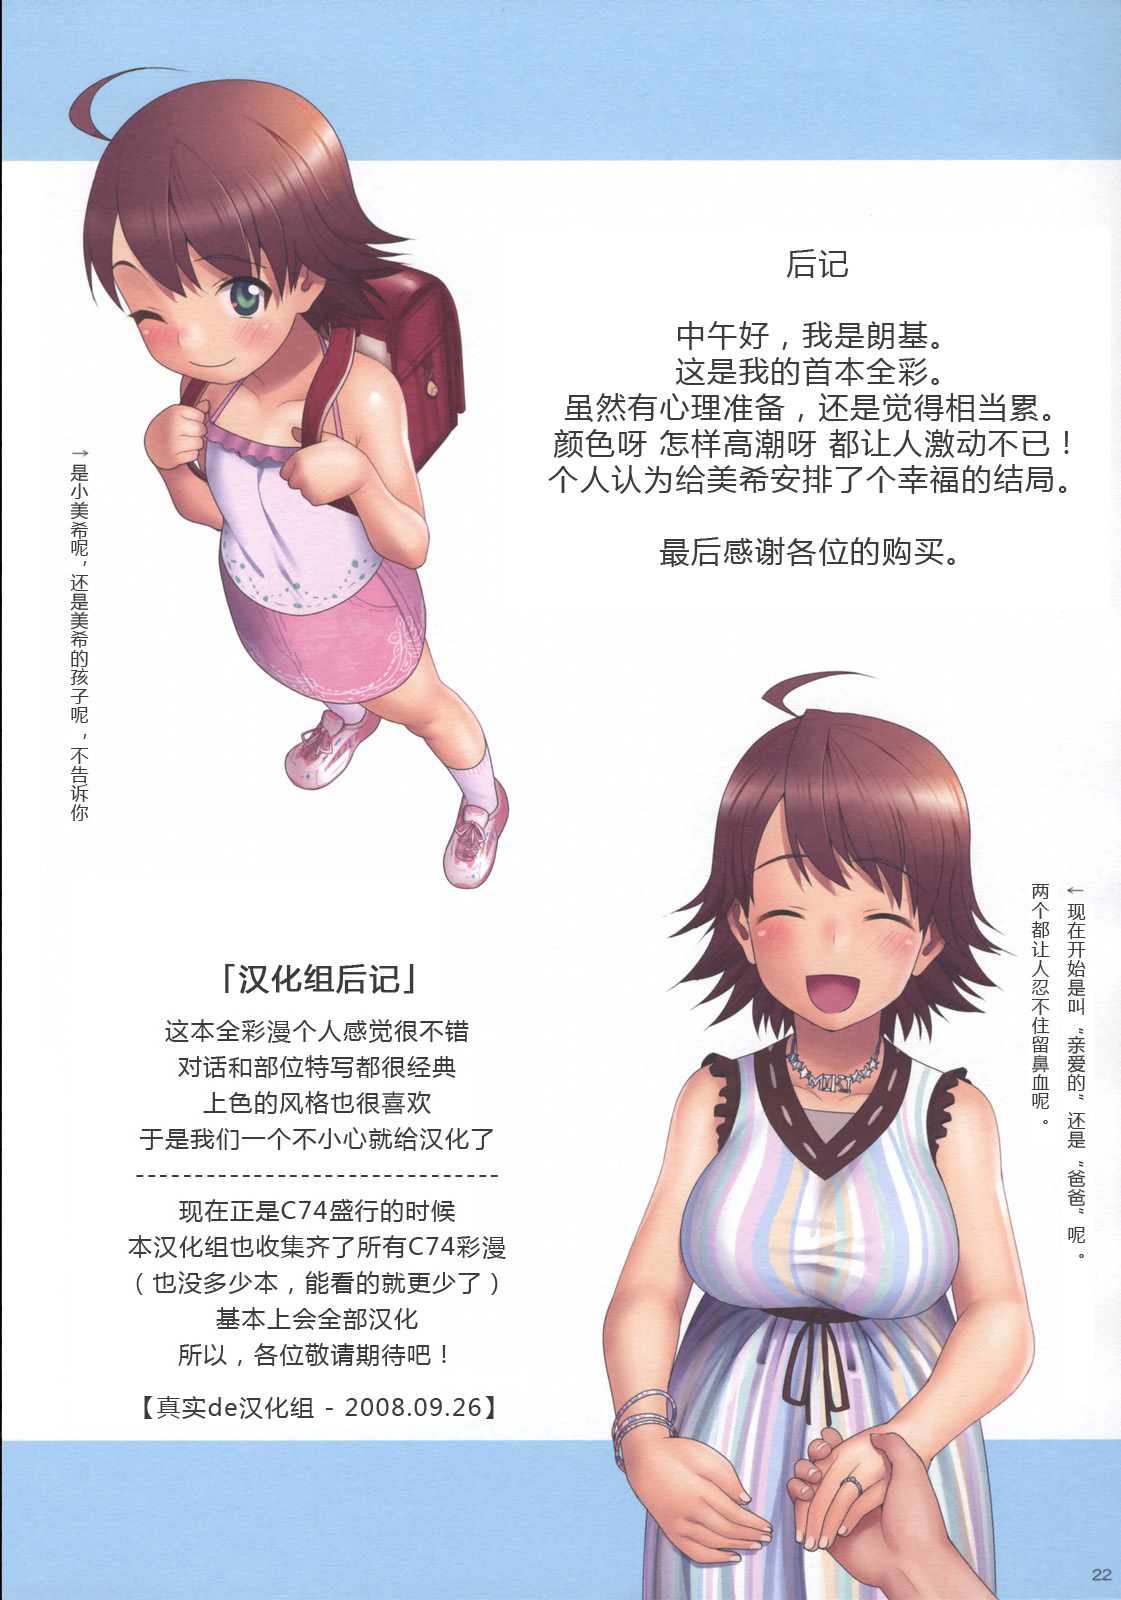 (CT12) [TNC. (Lunch)] Fourteen Plus (THE iDOLM@STER) [Chinese] [真实de汉化组] page 21 full